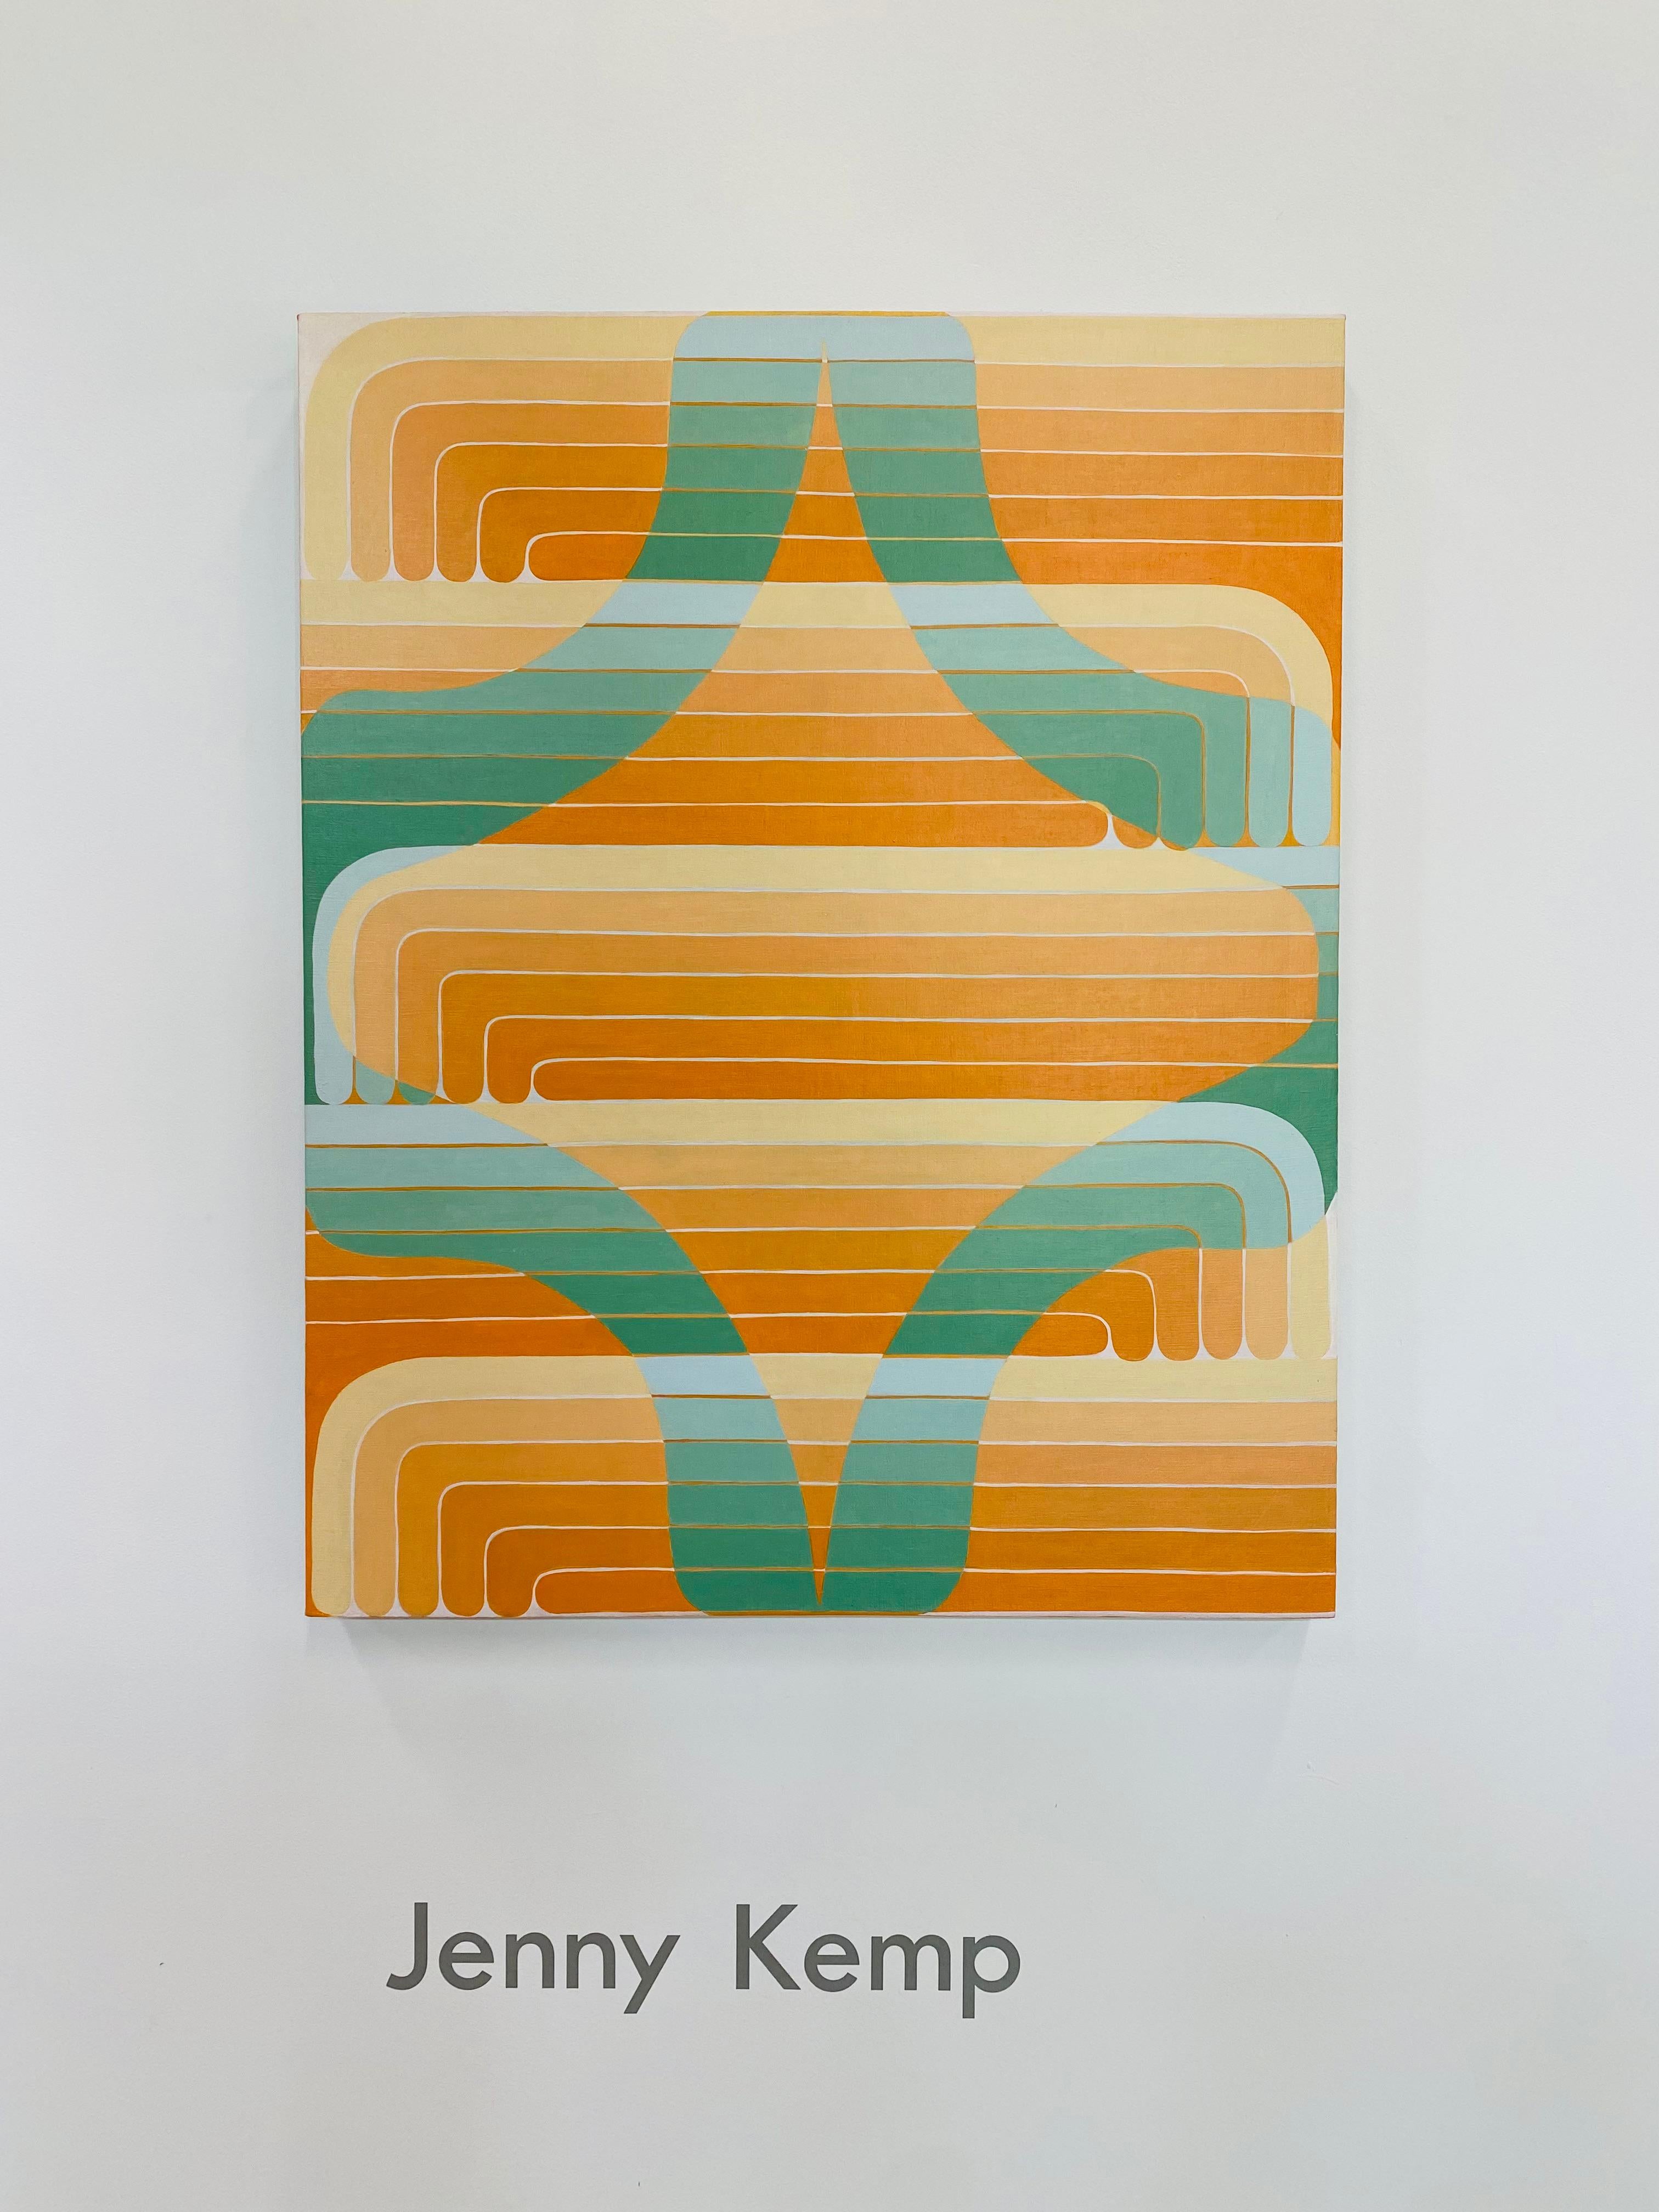 Green Aster, Orange, Light Sage Green Curving Lines, Geometric Abstract - Painting by Jenny Kemp